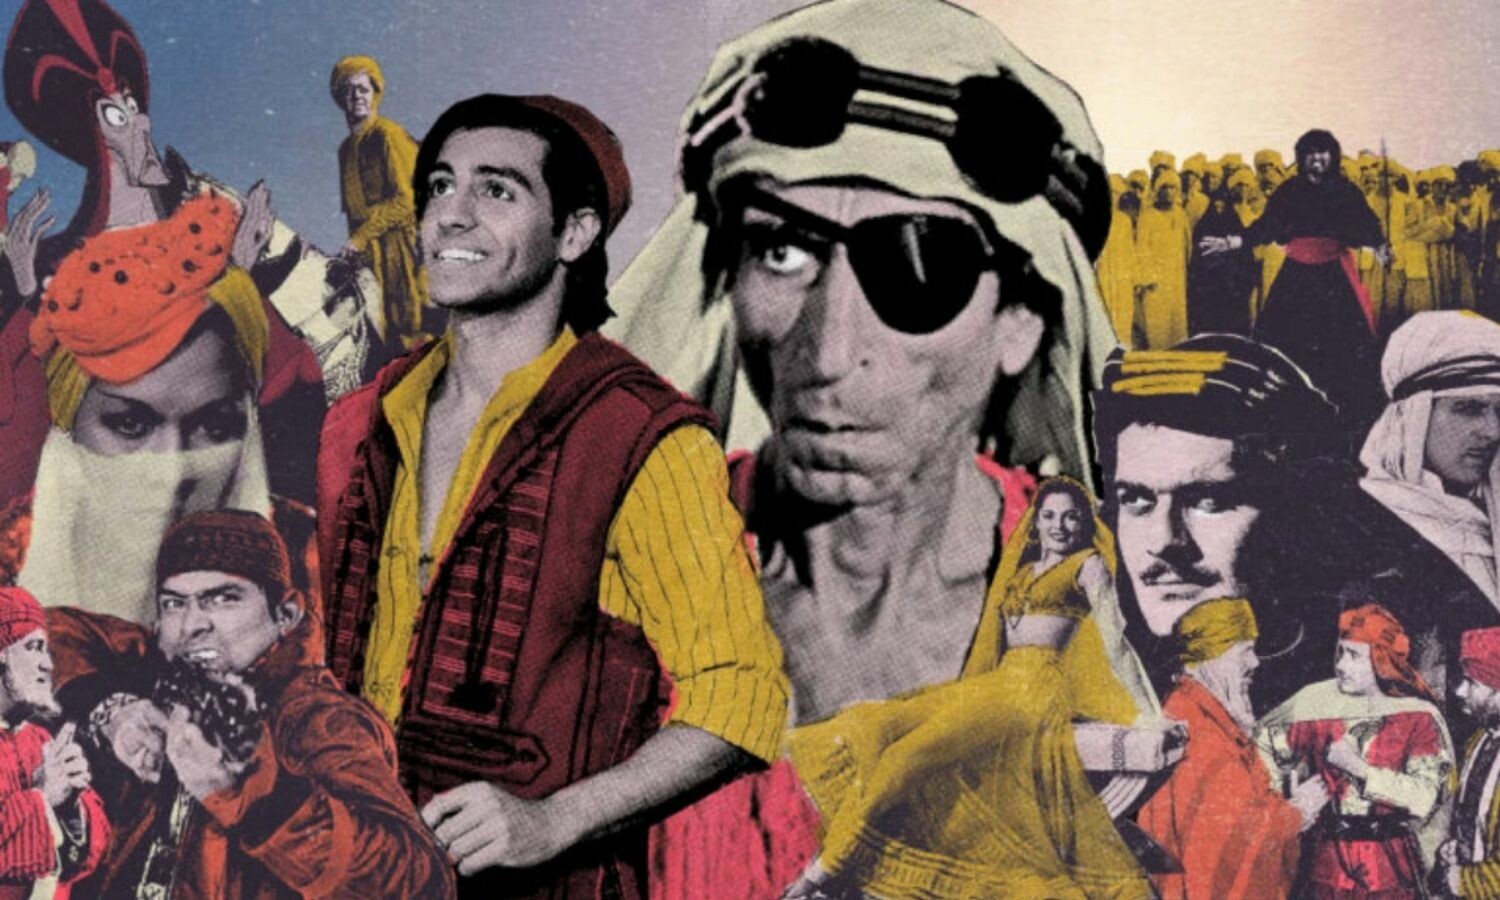 A collage of stereotypical Middle Eastern figures, most recognizable from left to right are Jafar, a woman with a veil covering her face from the eyes down, an angry man with a machine gun, Aladdin, a belly dancer, and men with Middle Eastern head wraps.